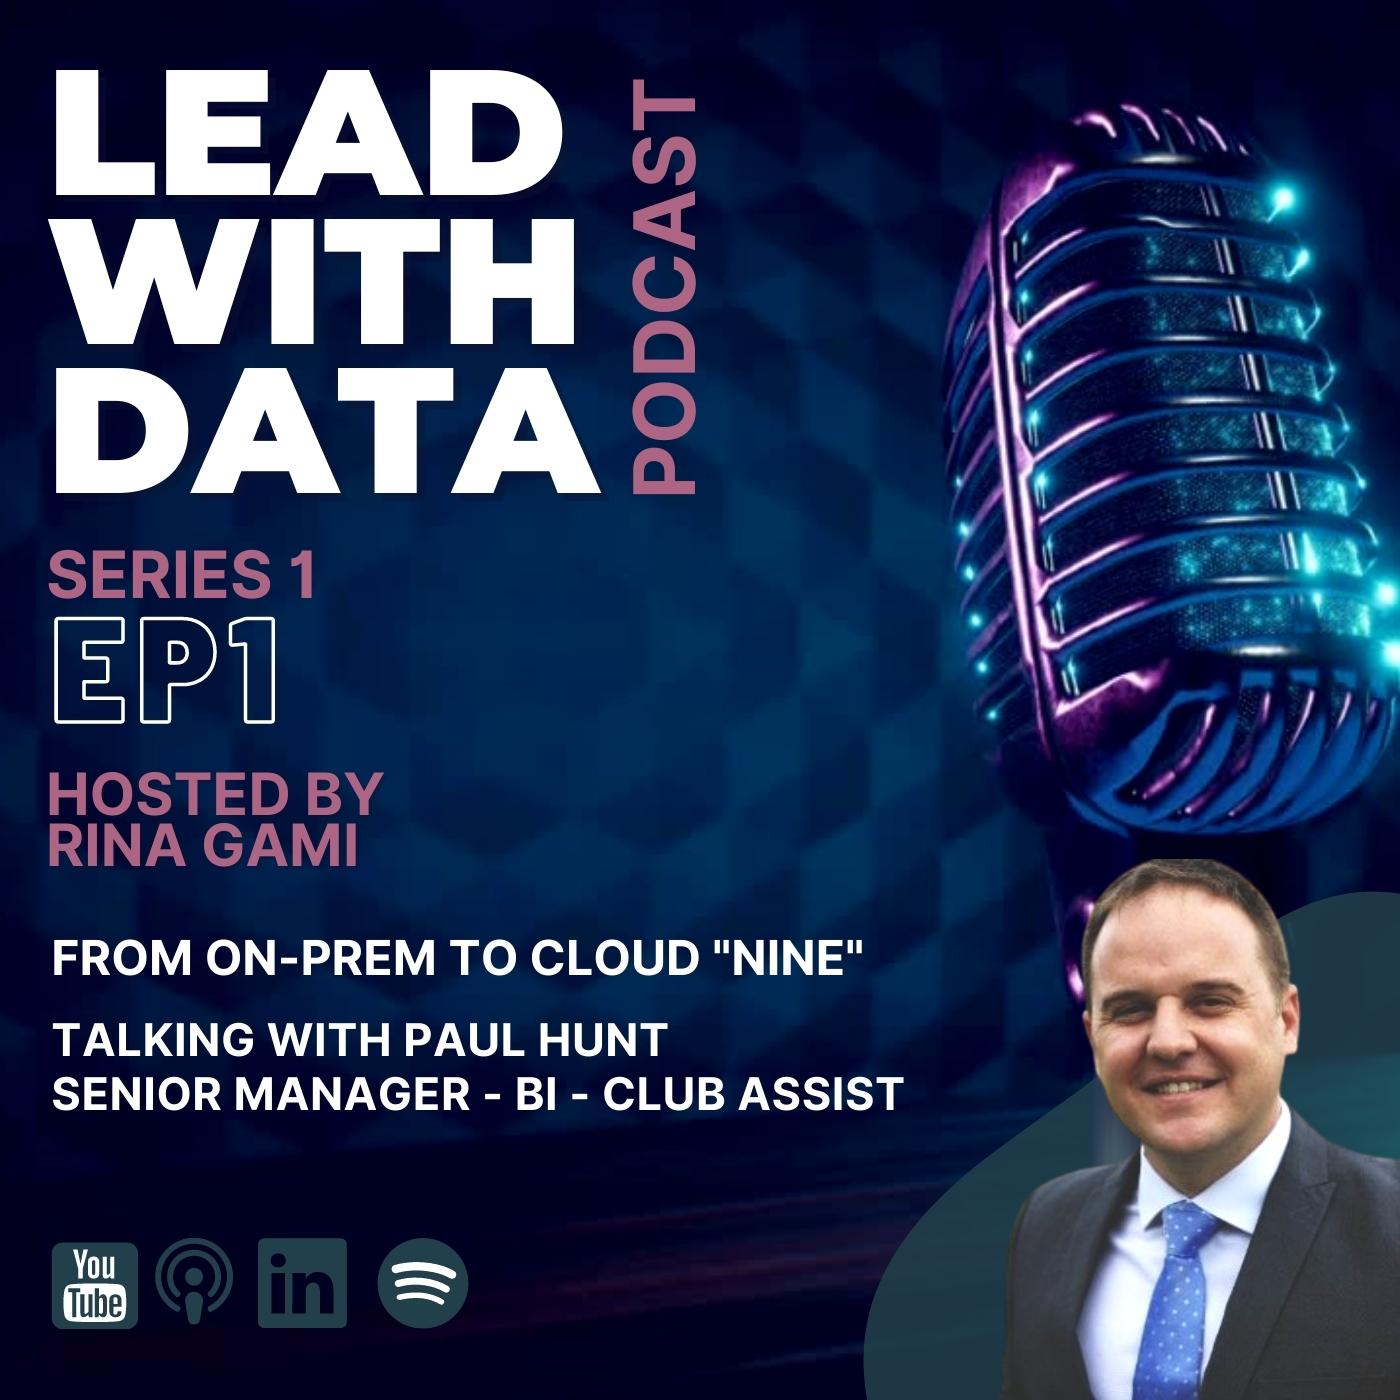 Artwork for podcast LEAD WITH DATA Podcast